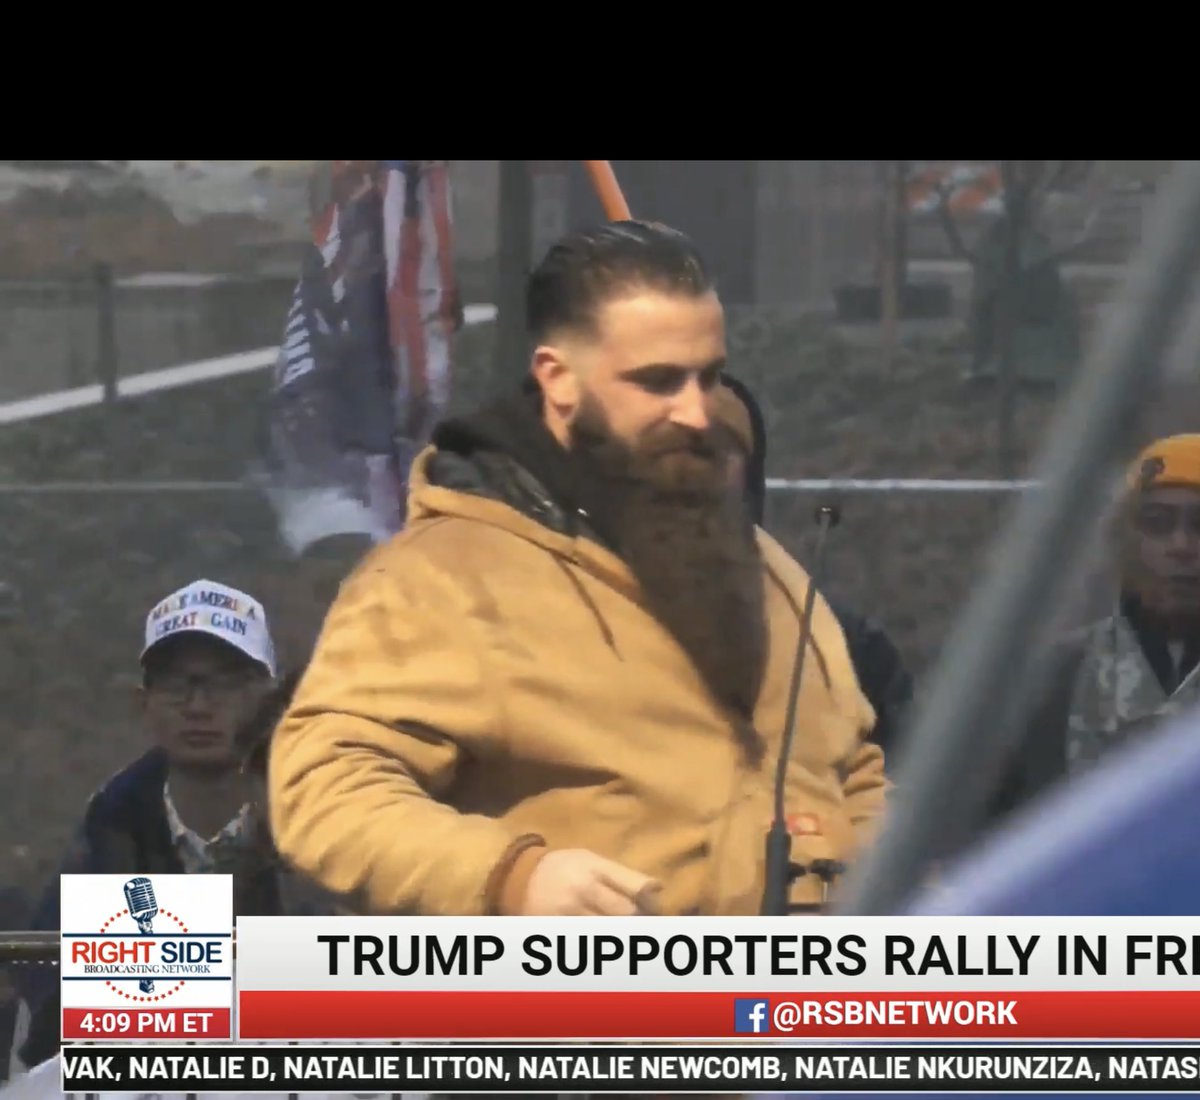  #ClutchAnon is stoked that his son* made it to the stage. This chud’s a hero because he defied health orders and kept his MAGA gym open so everyone could bring Covid home for the holidays.* not 100% sure lol